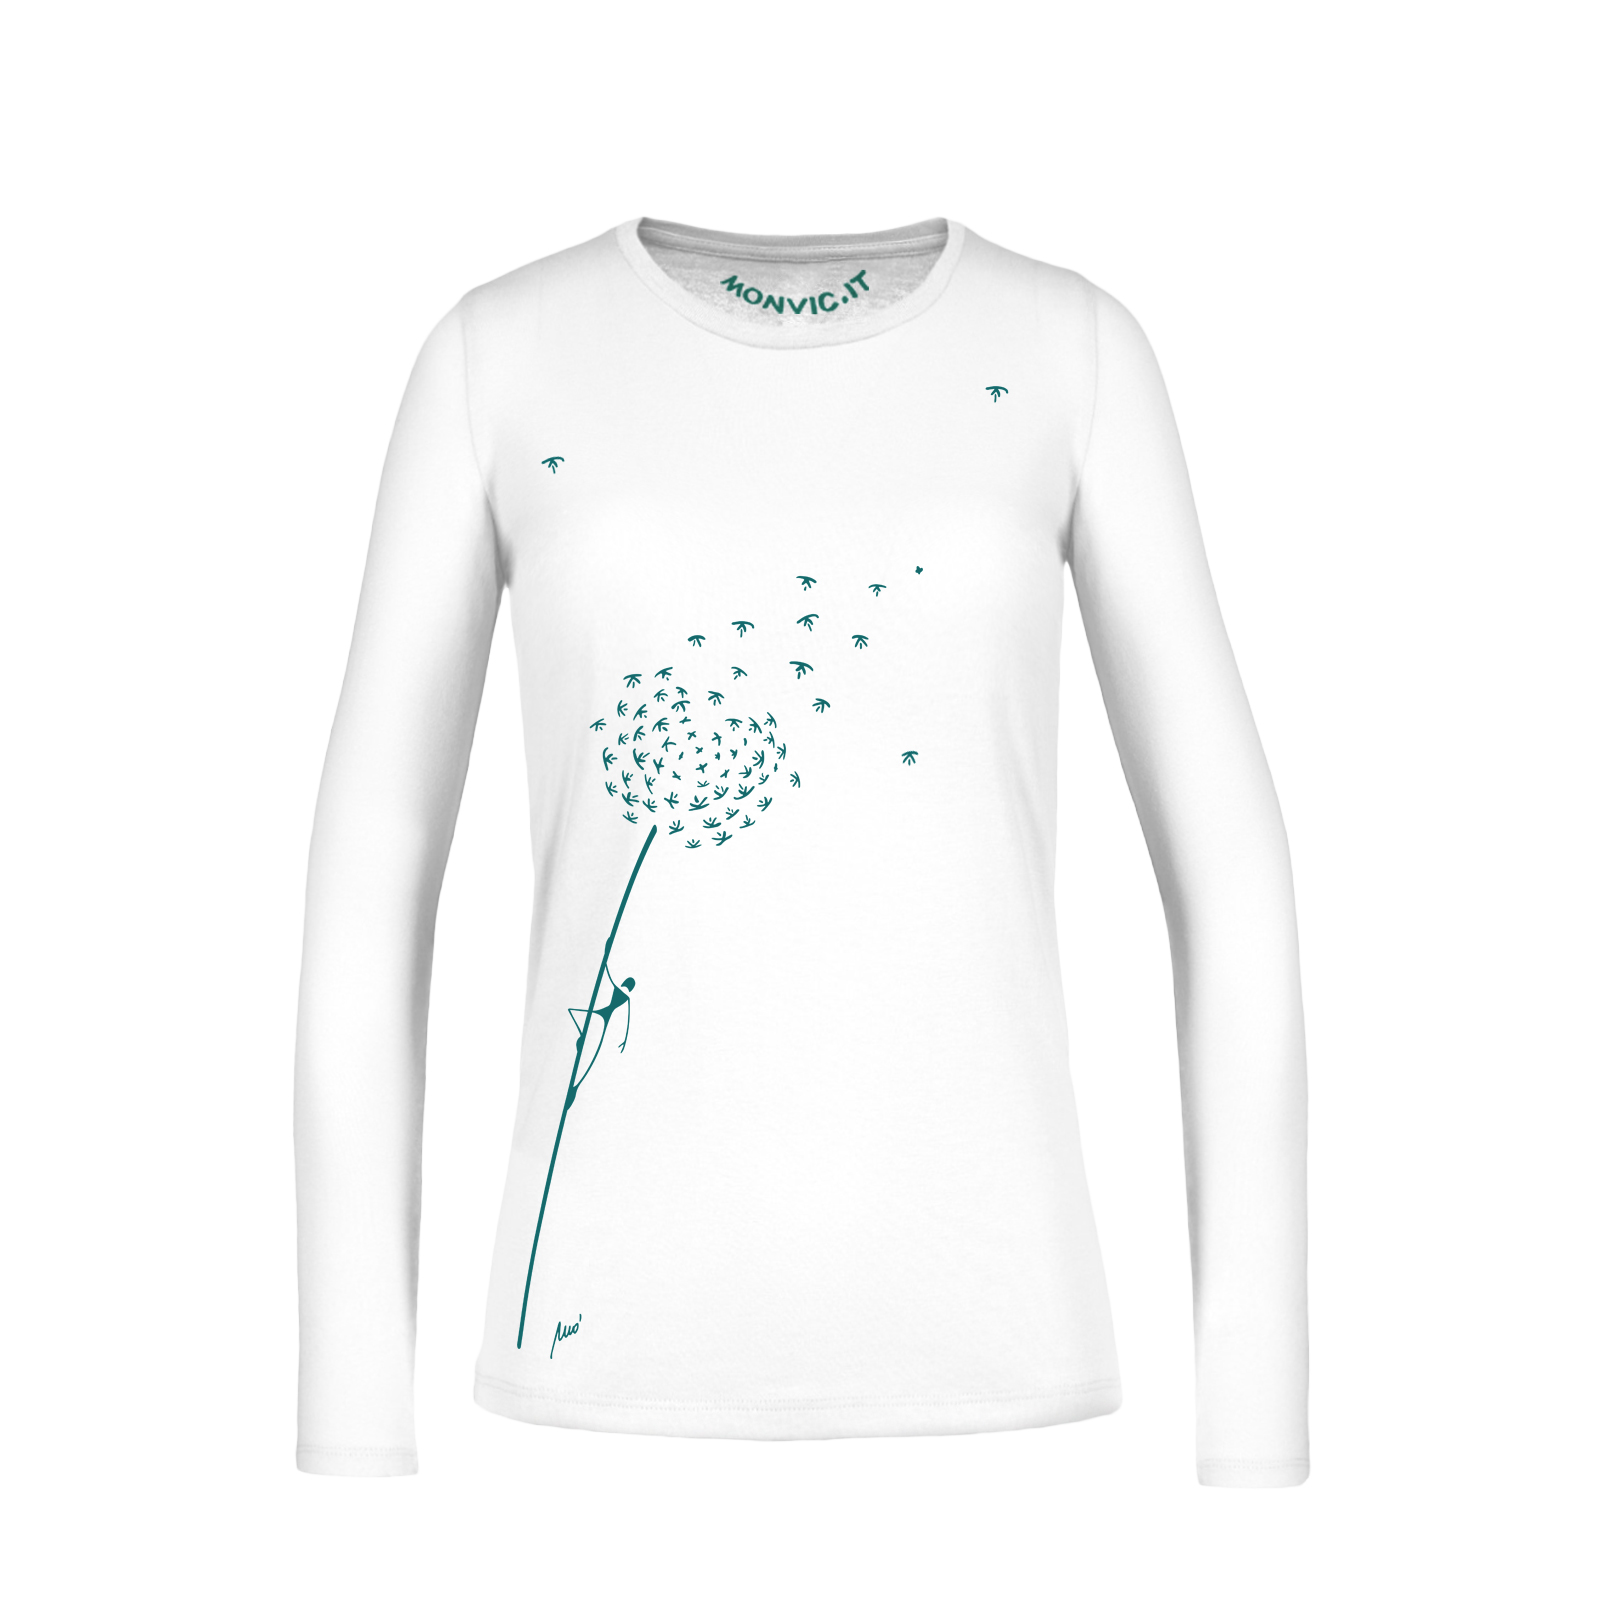 Long sleeved t-shirt women white for climbing MOLLY Round neck